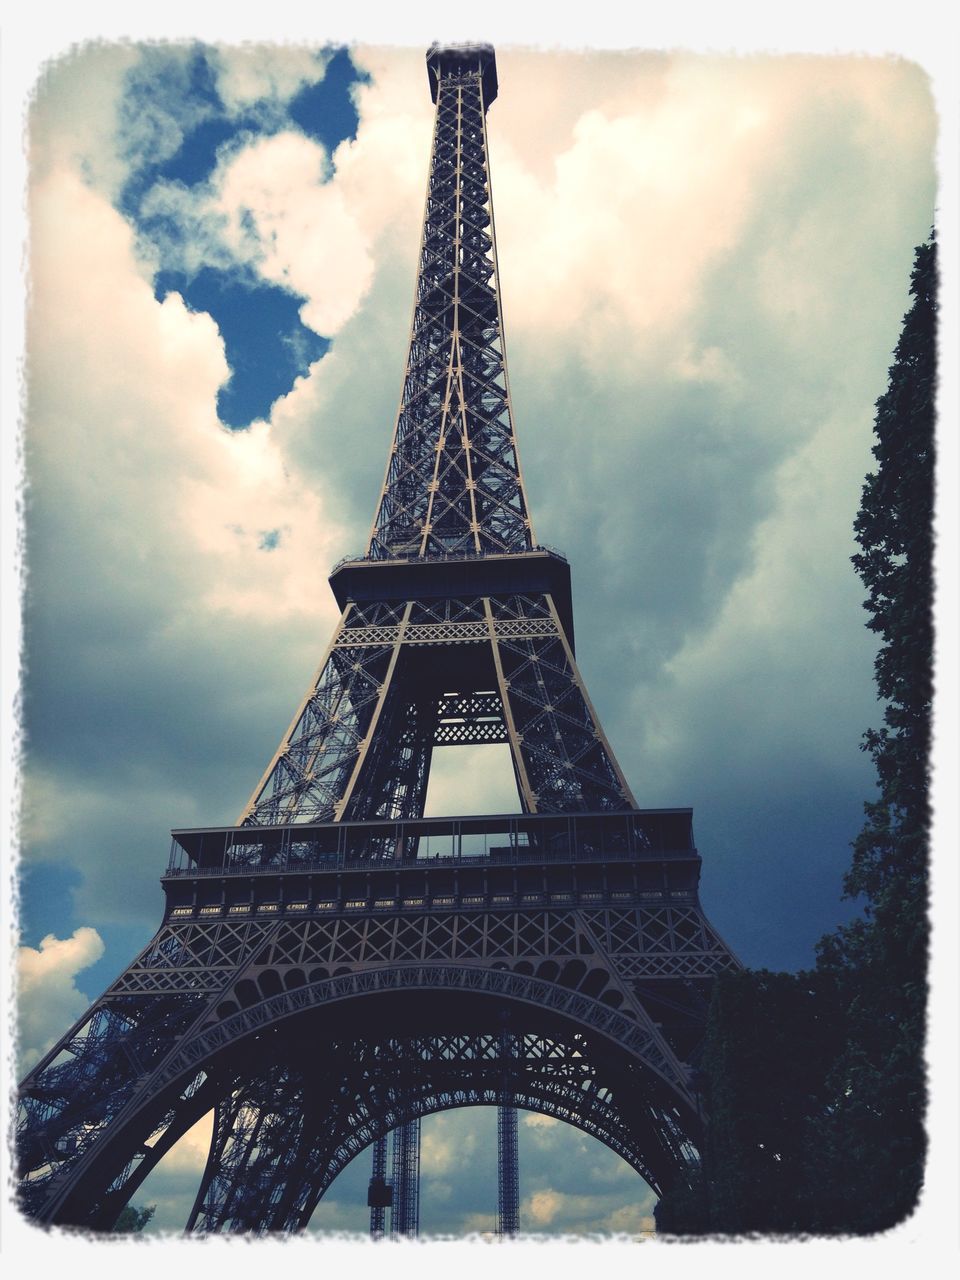 eiffel tower, architecture, built structure, transfer print, sky, culture, international landmark, famous place, low angle view, tower, metal, travel destinations, capital cities, cloud - sky, tourism, auto post production filter, tall - high, history, travel, cloudy